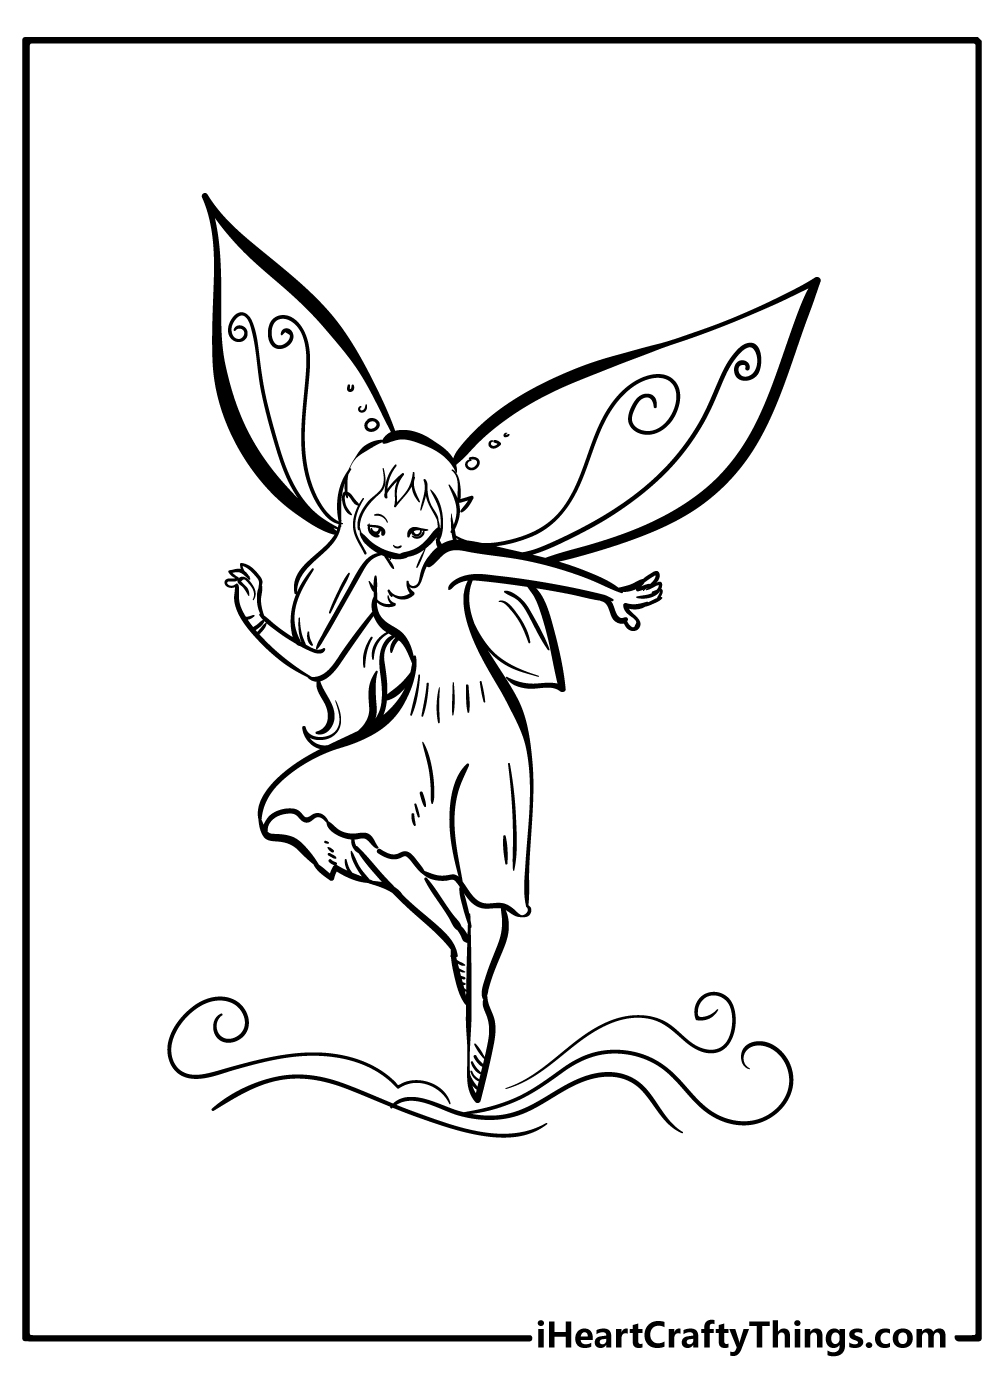 Fairy Coloring Pages for adults free printable